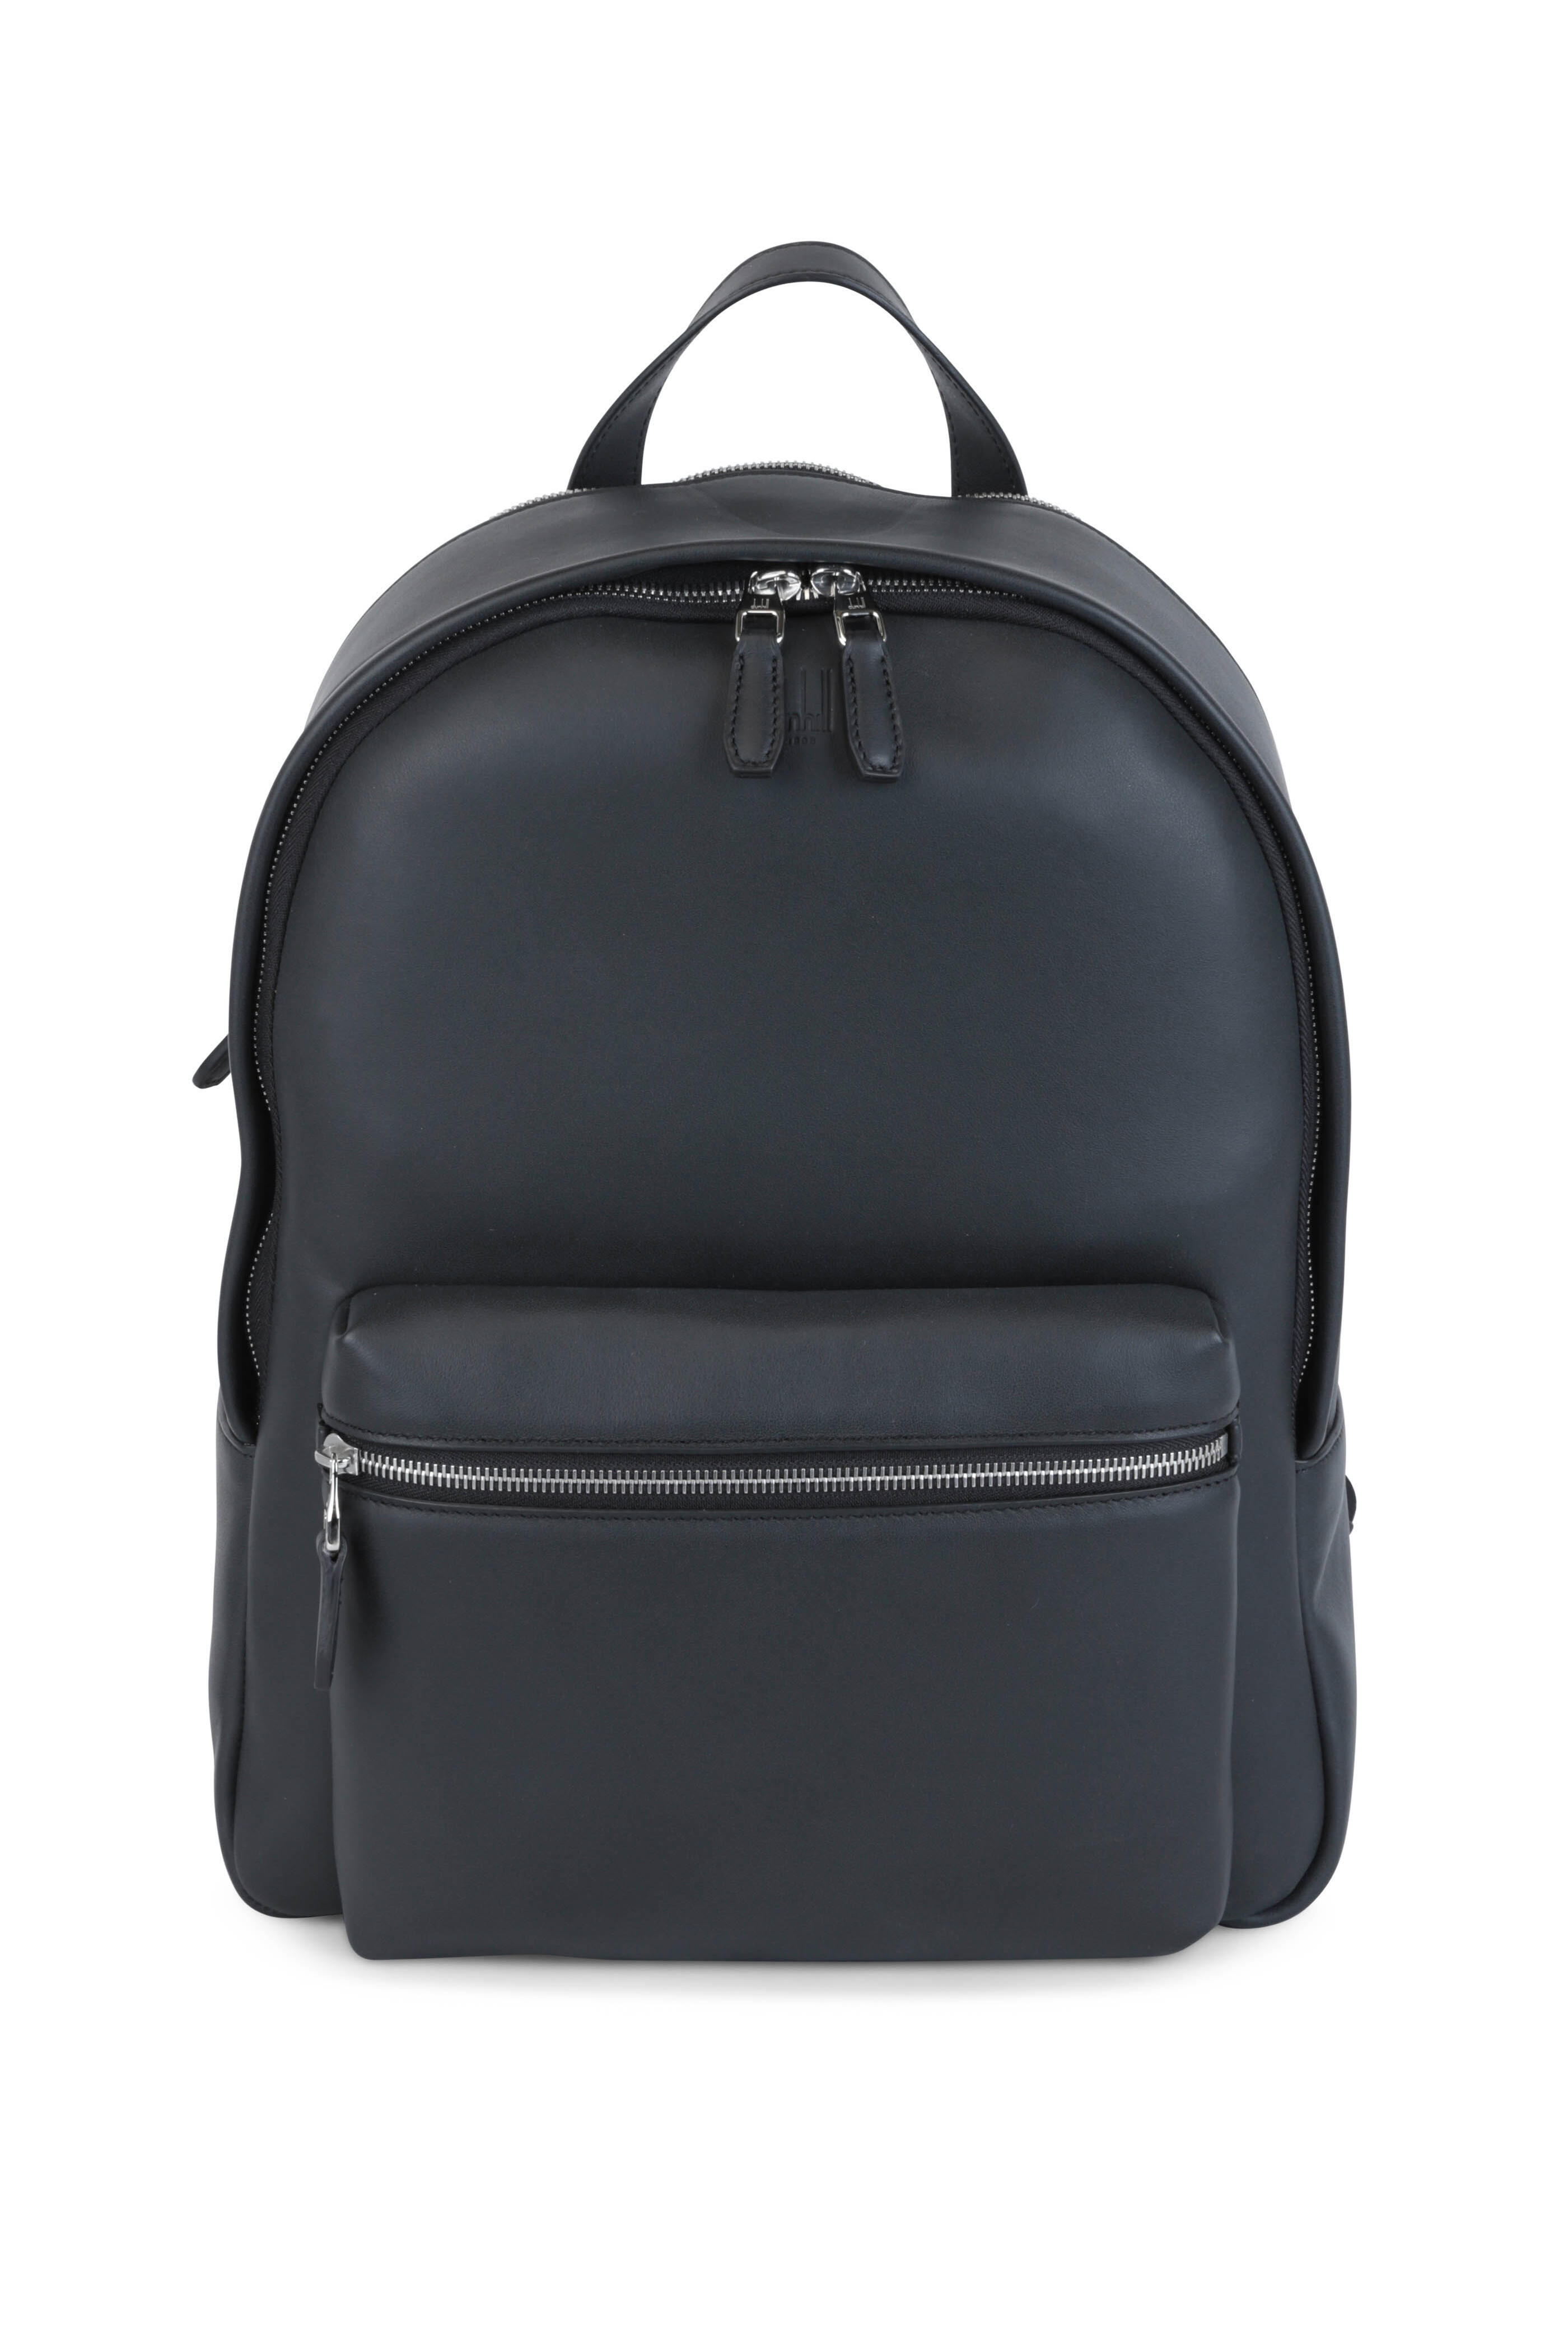 Dunhill - Black Leather Rucksack | Mitchell Stores